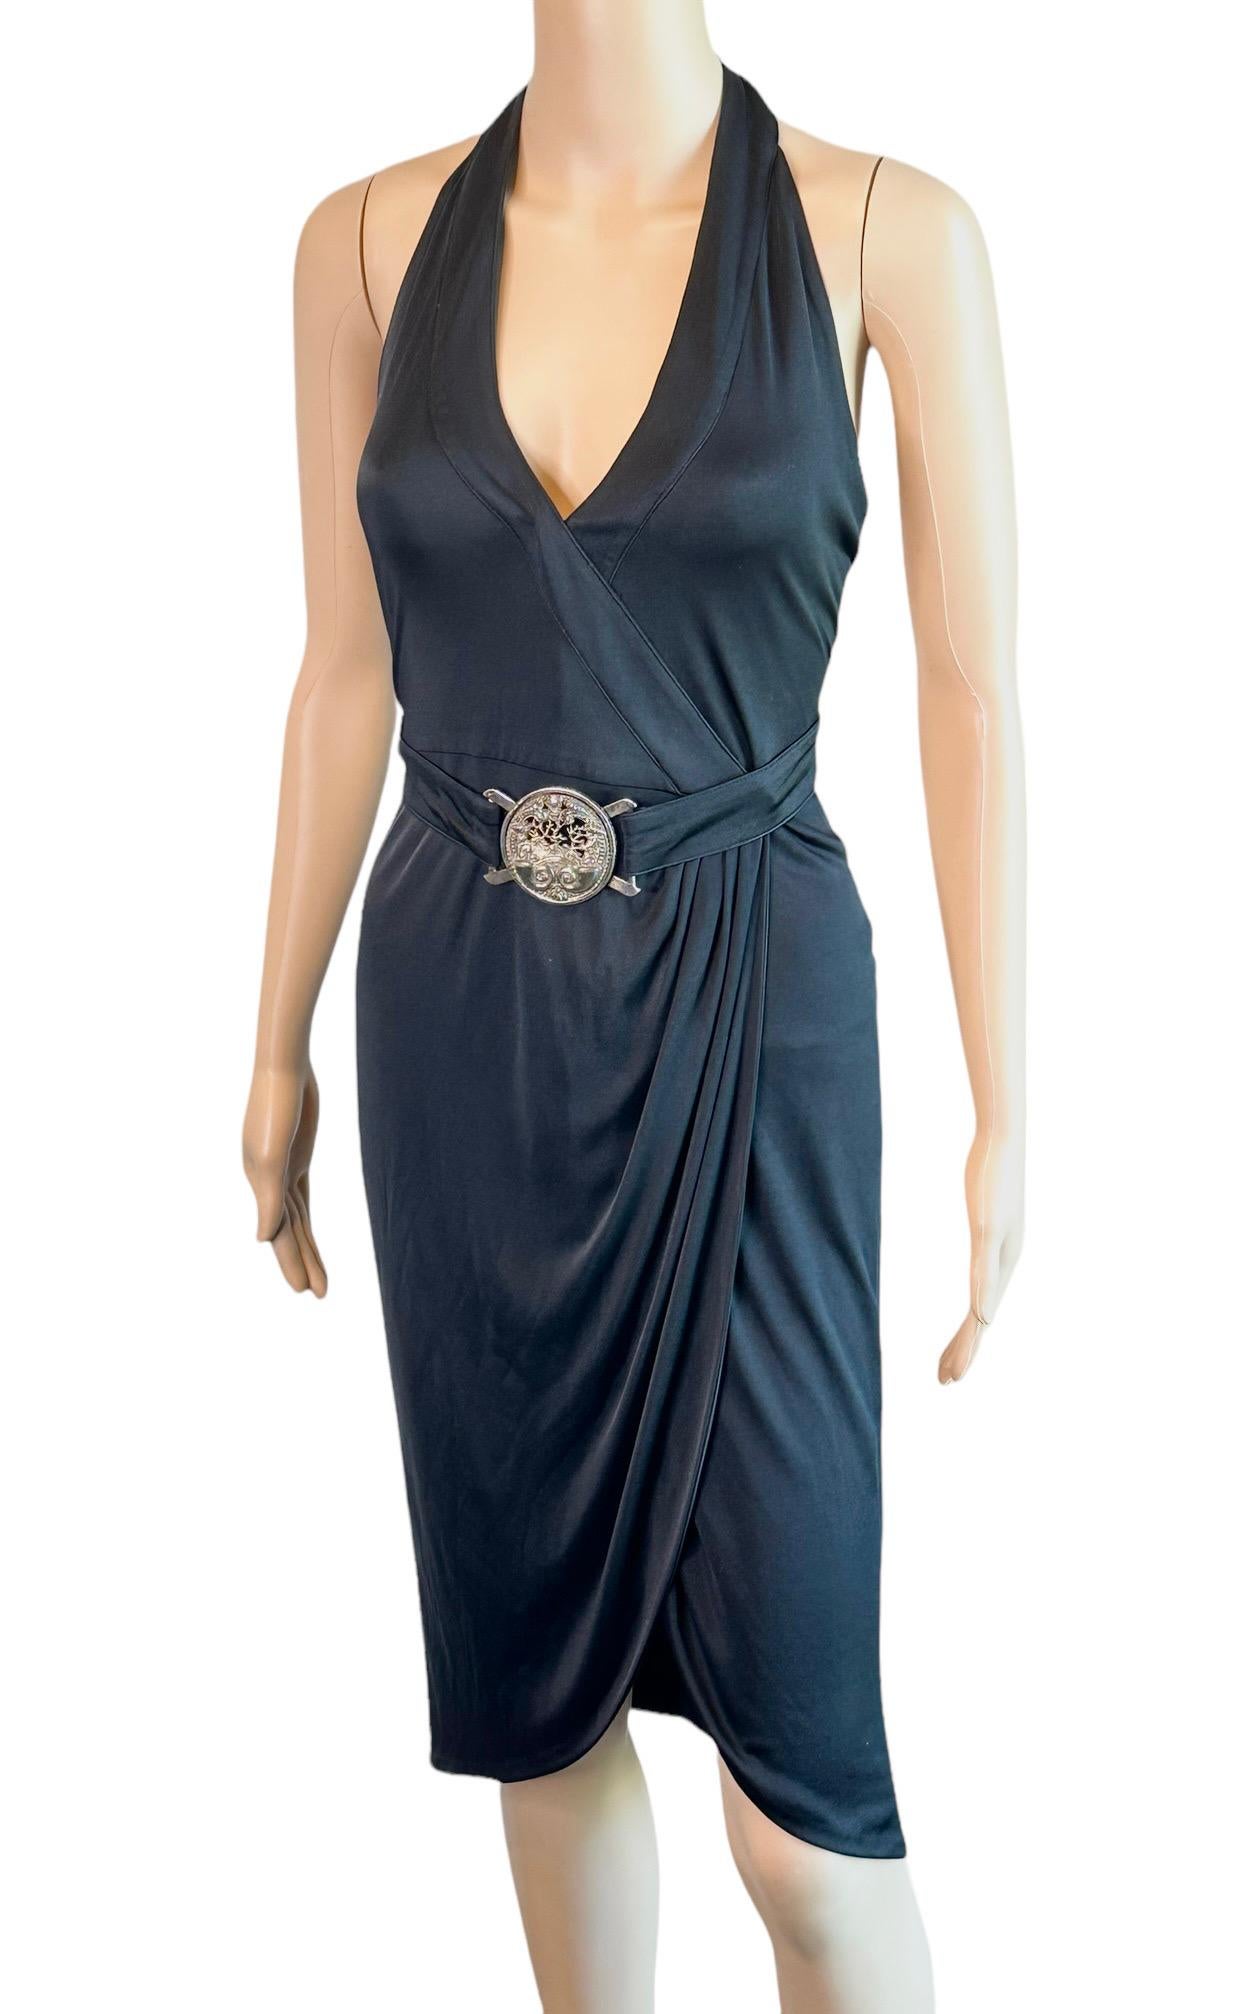 Versace S/S 2005 Runway Logo Belt Plunging Backless Wrap Black Dress In Good Condition For Sale In Naples, FL